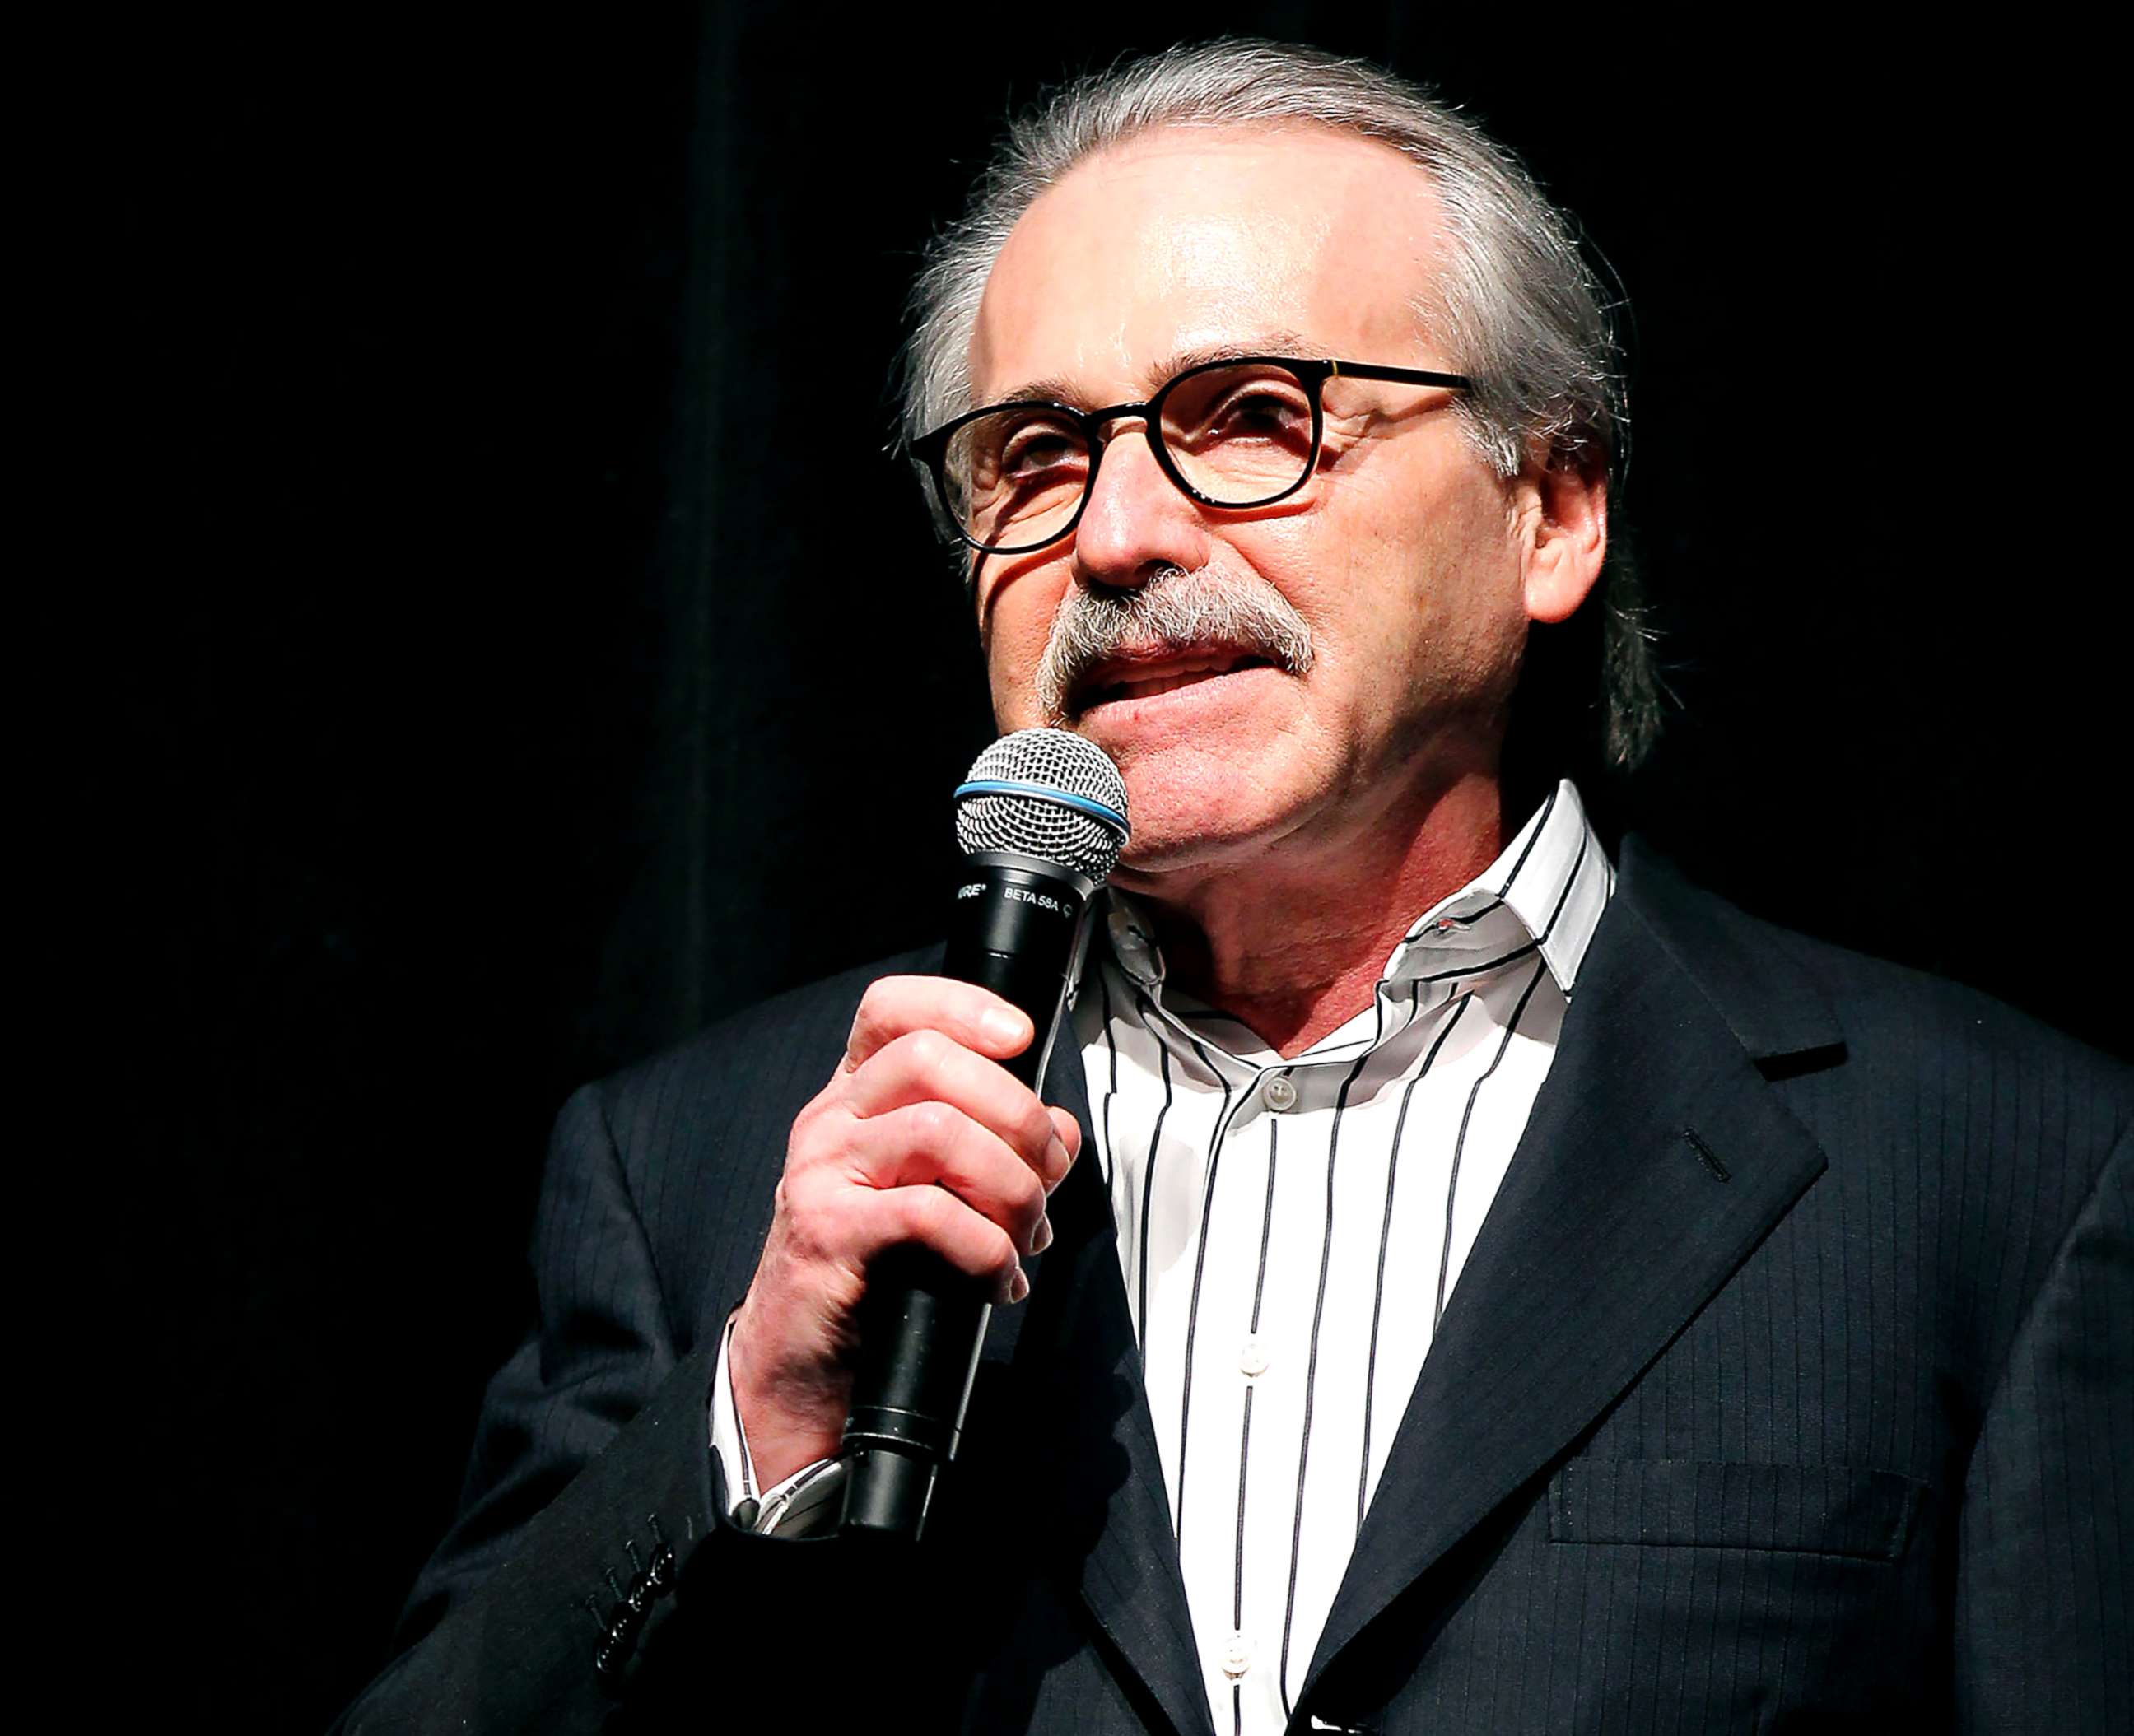 PHOTO: In this file photo dated Jan. 31, 2014, David Pecker, Chairman and CEO of American Media, which publishes the National Enquirer, addresses those attending the Shape & Men's Fitness Super Bowl Party in New York.